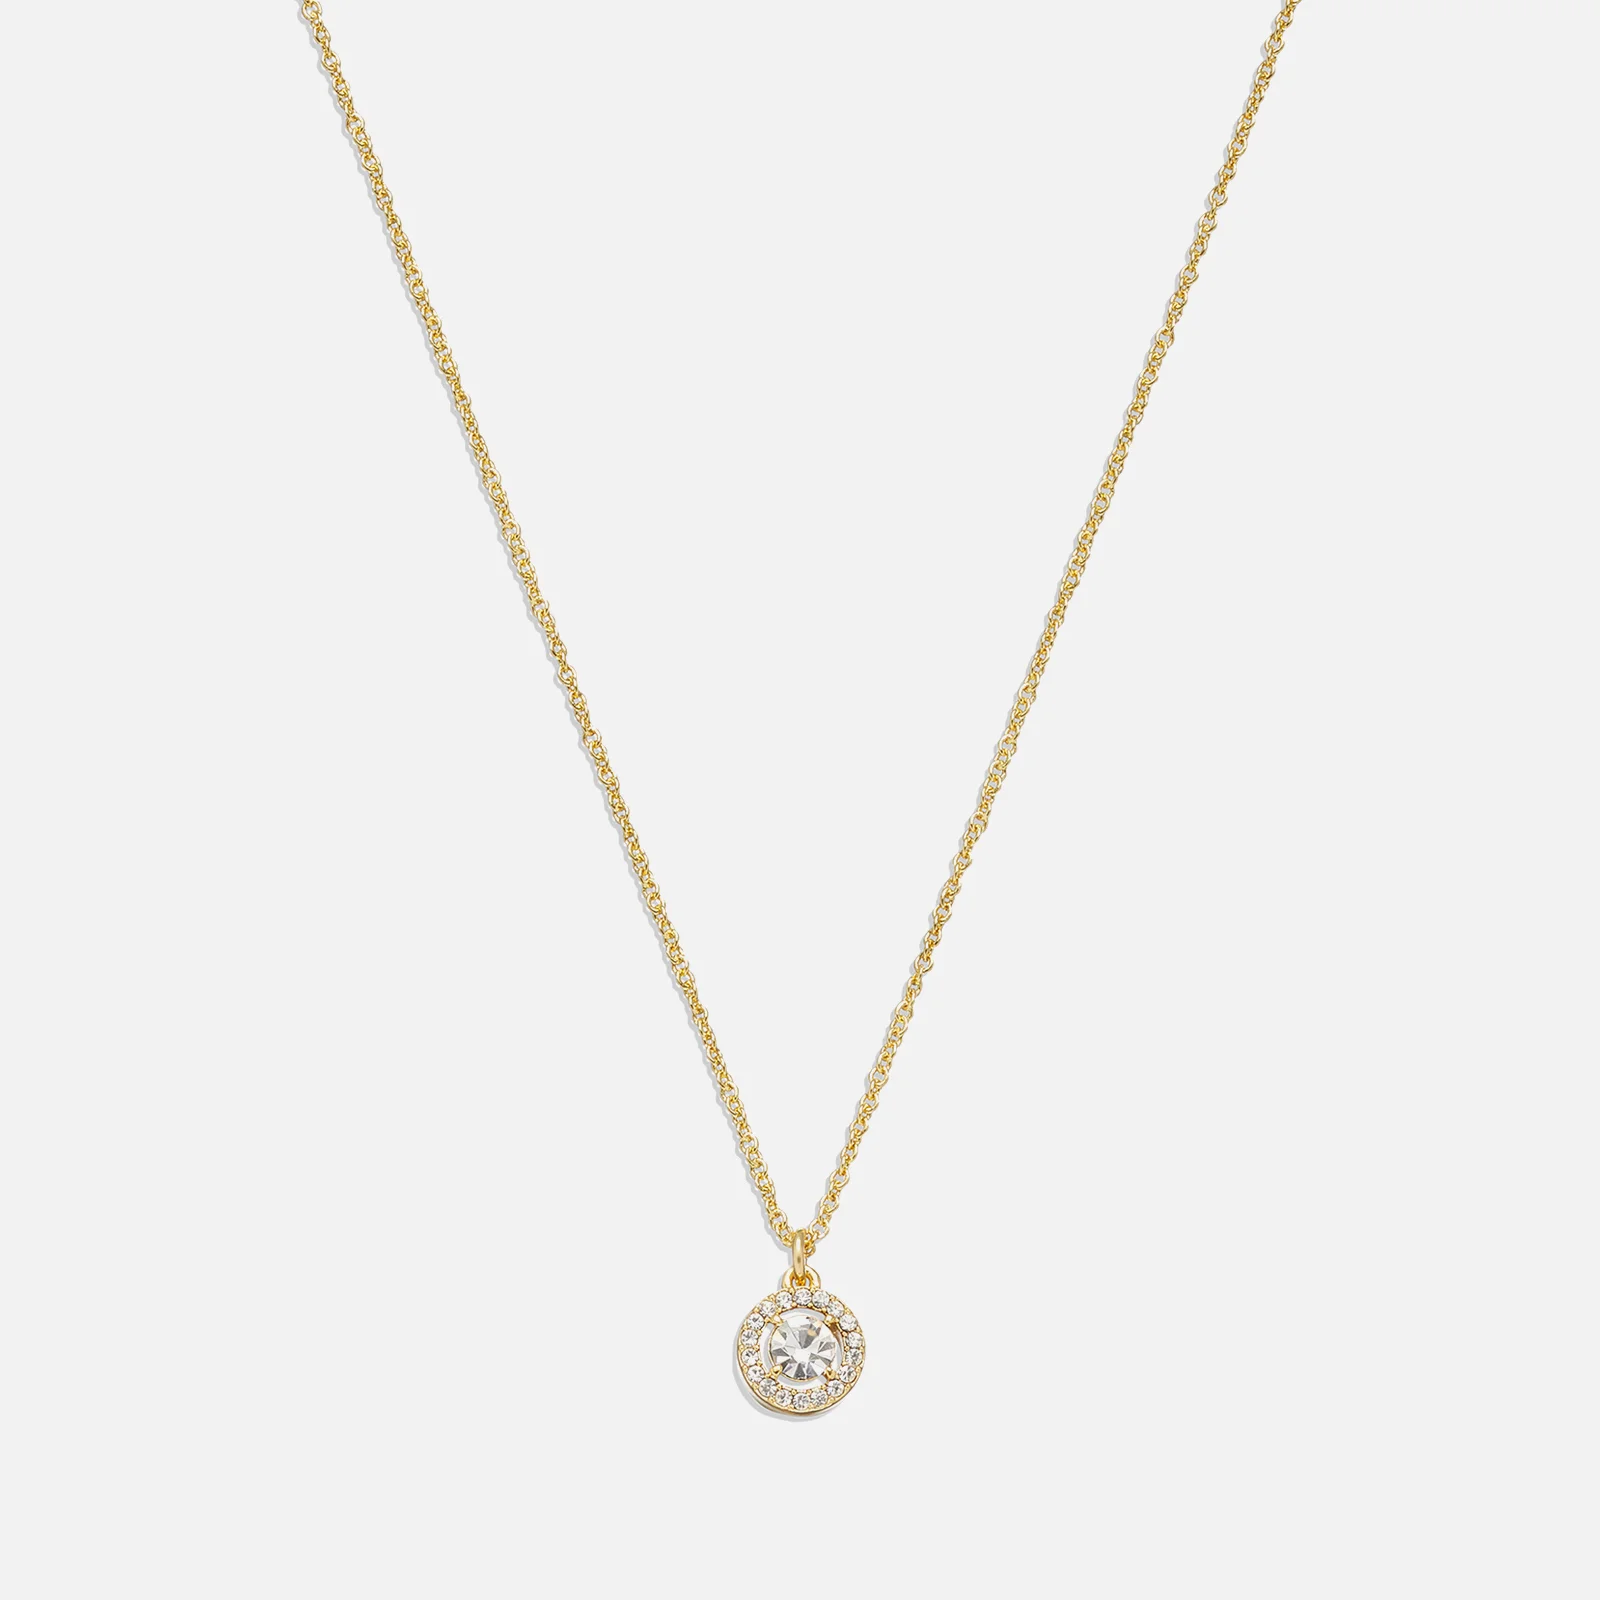 Coach Pave Halo Pendant Gold-Plated Necklace Image 1